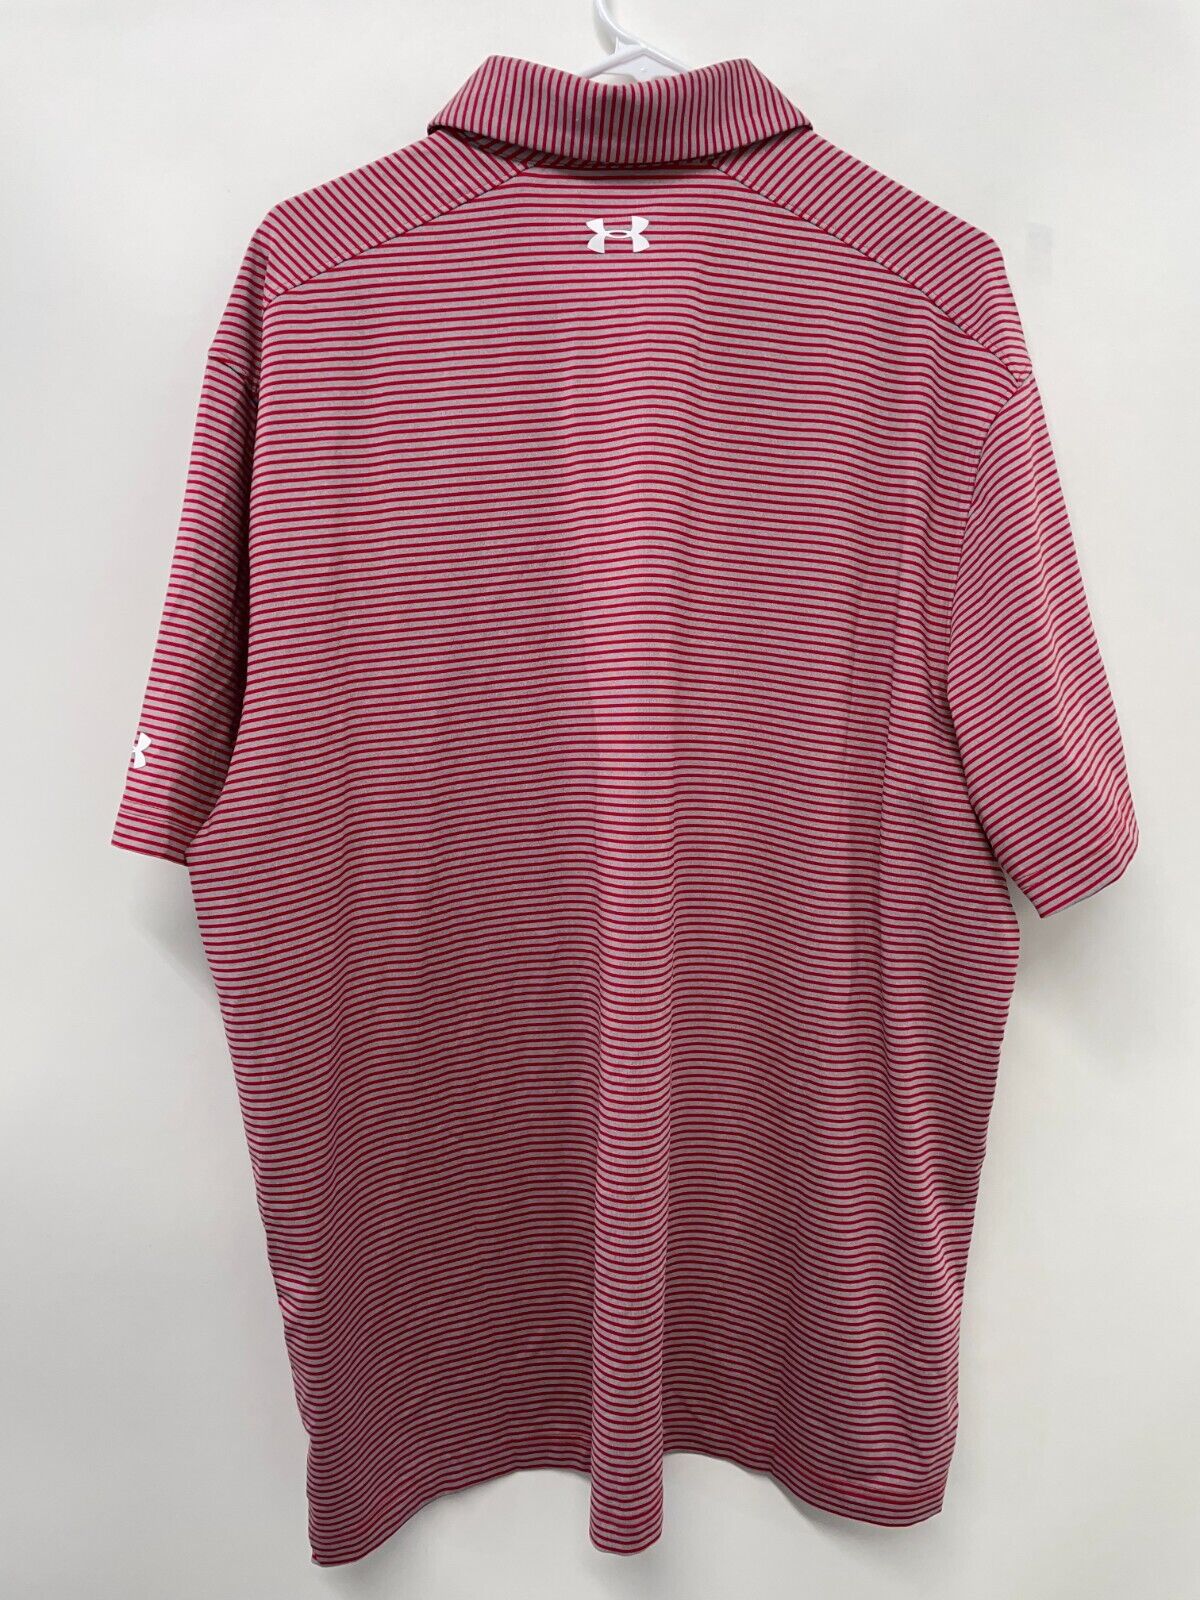 Under Armour Men's XL Playoff Polo Red Gray Stripe Loose Fit UPF 30 1283706 NWT